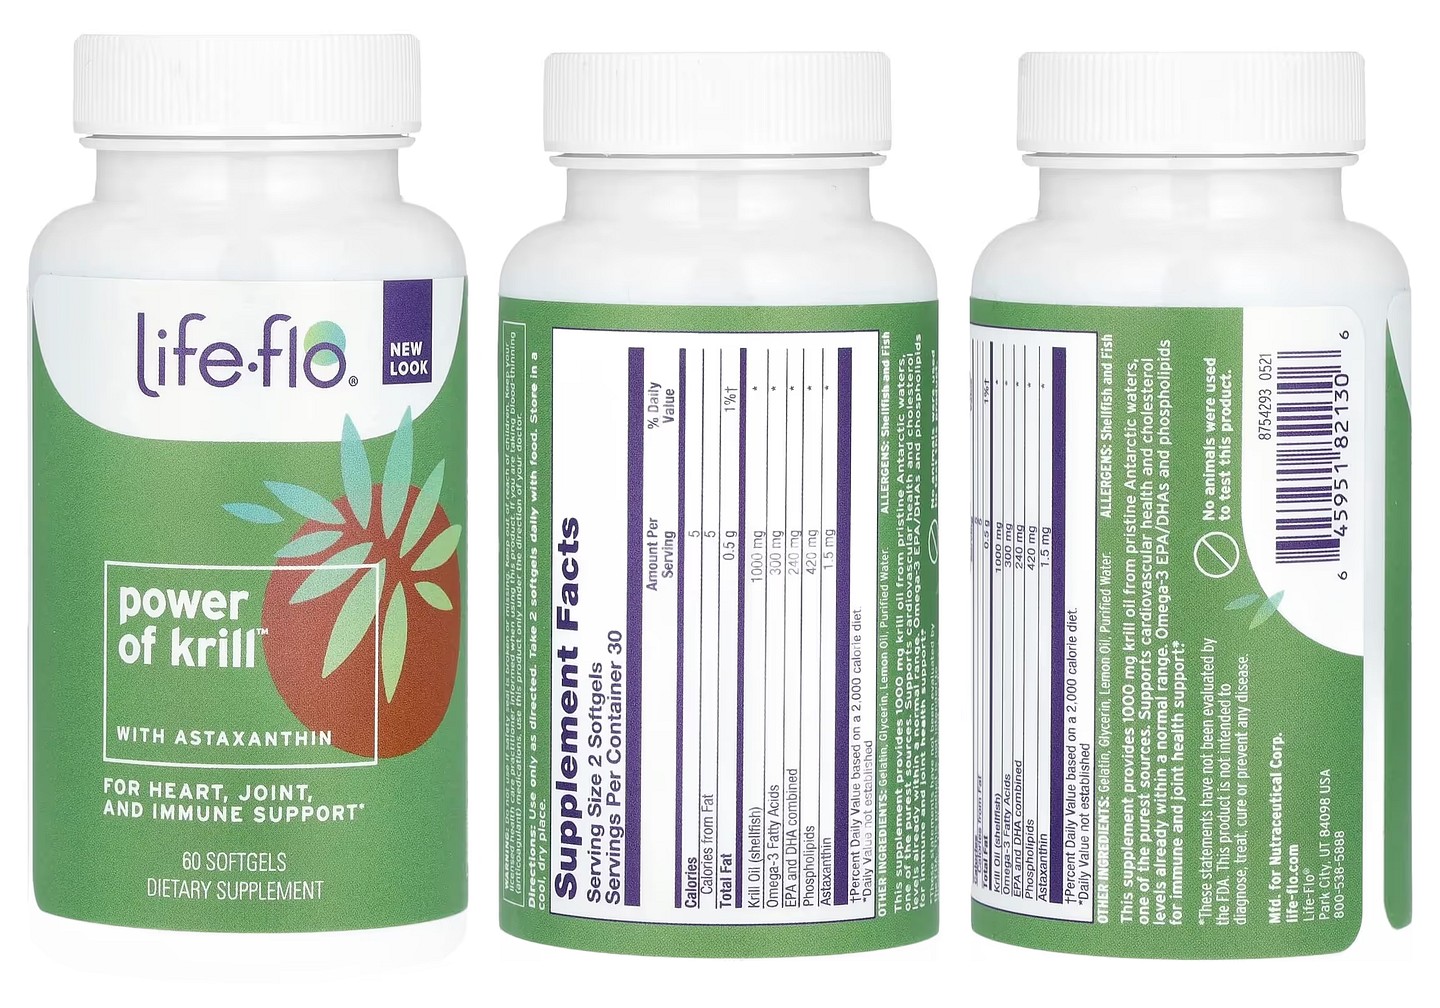 Life-flo, Power of Krill With Astaxanthin packaging